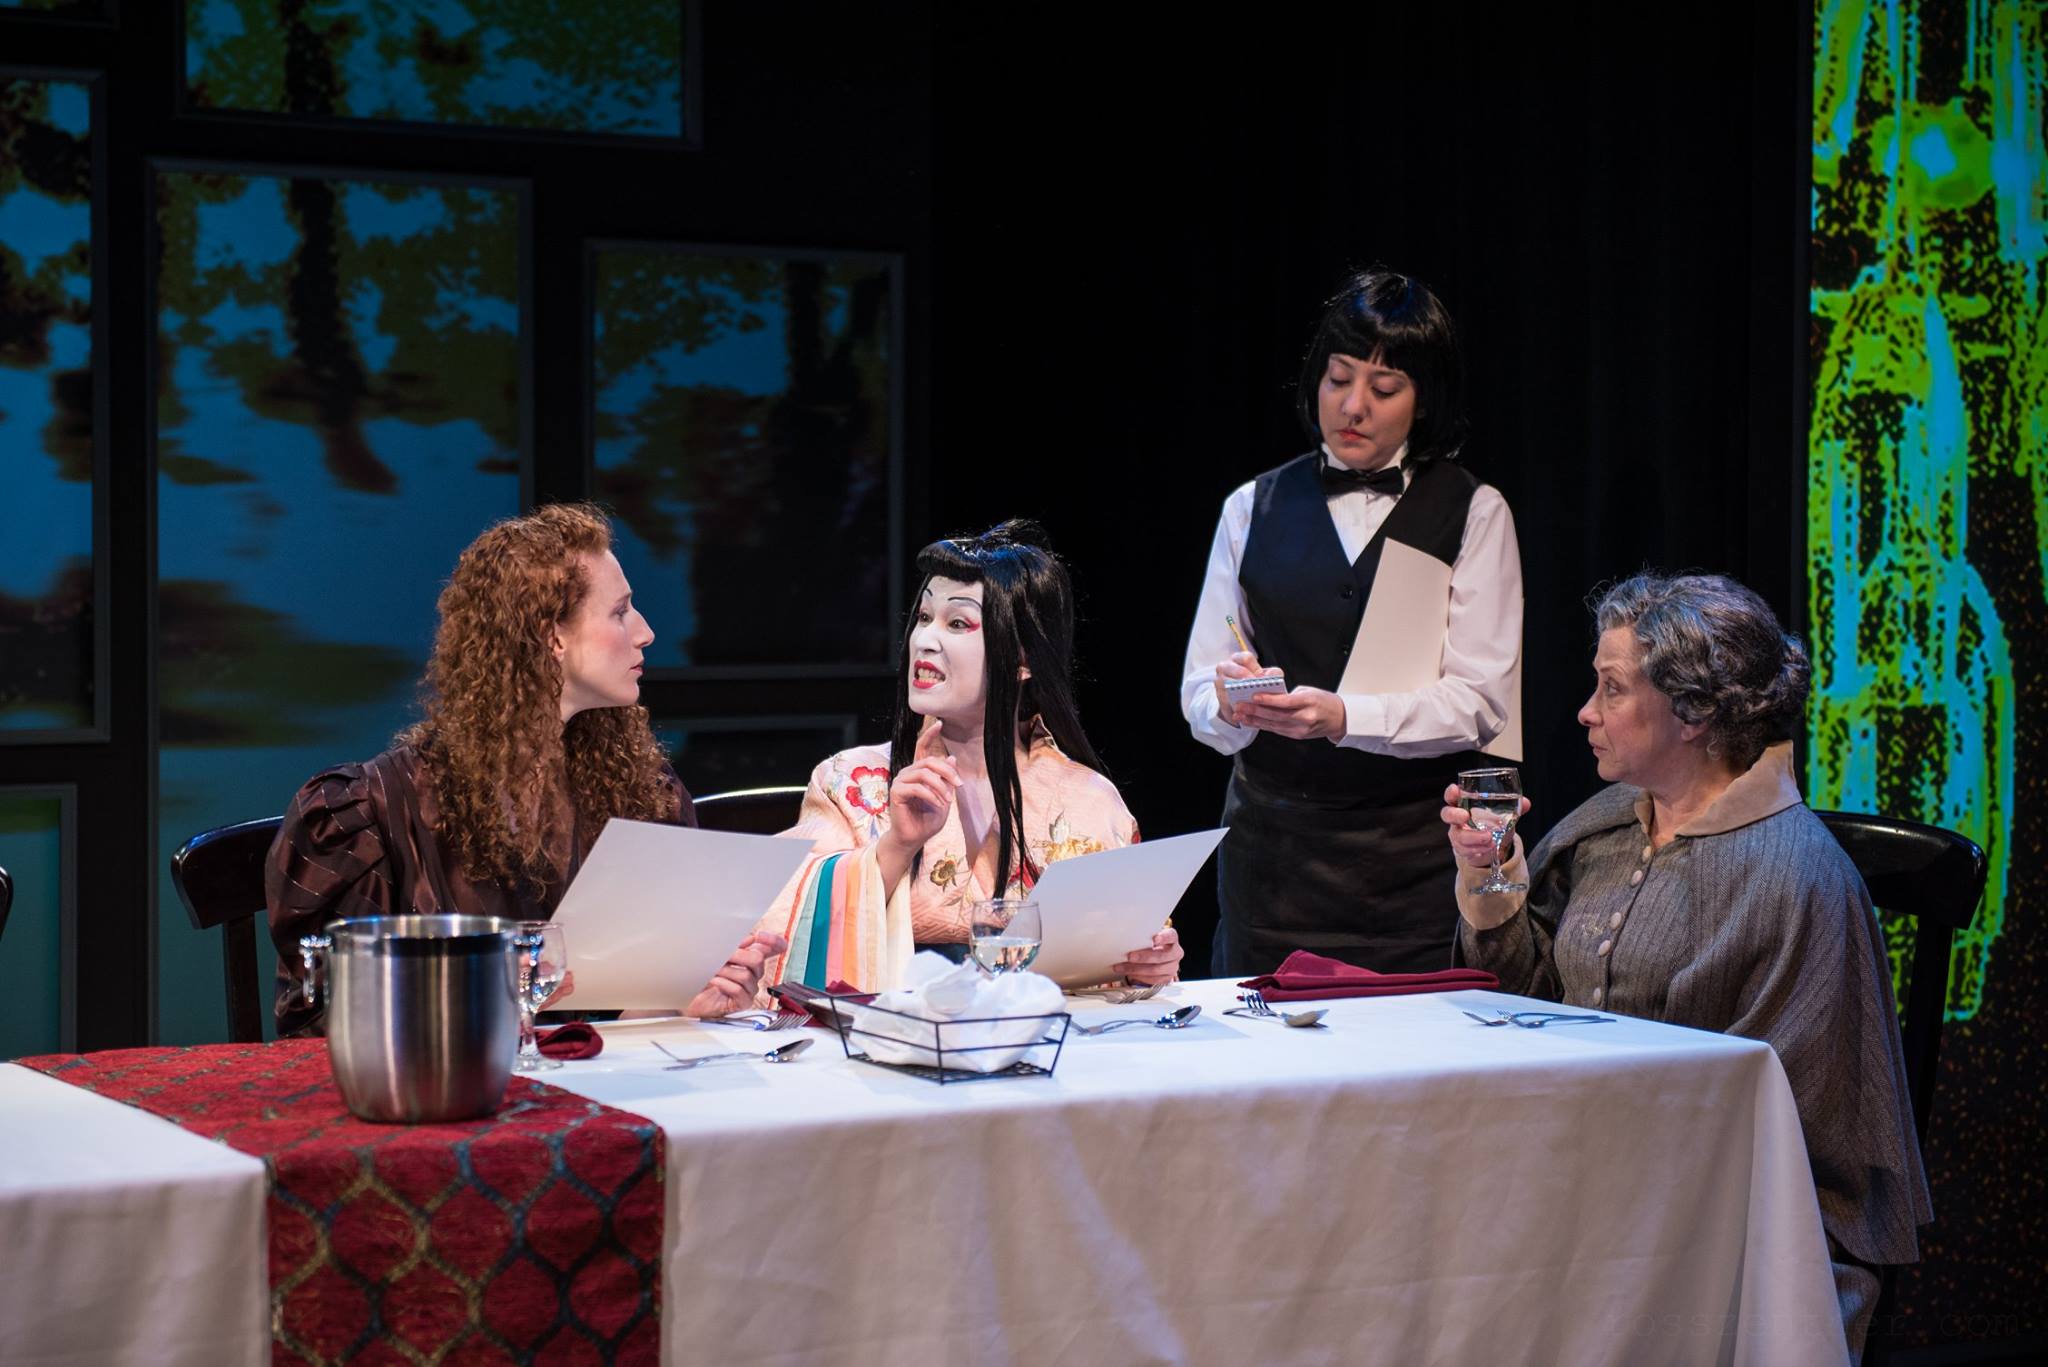 Renaissance Theaterworks production of Top Girls by Caryl Churchill